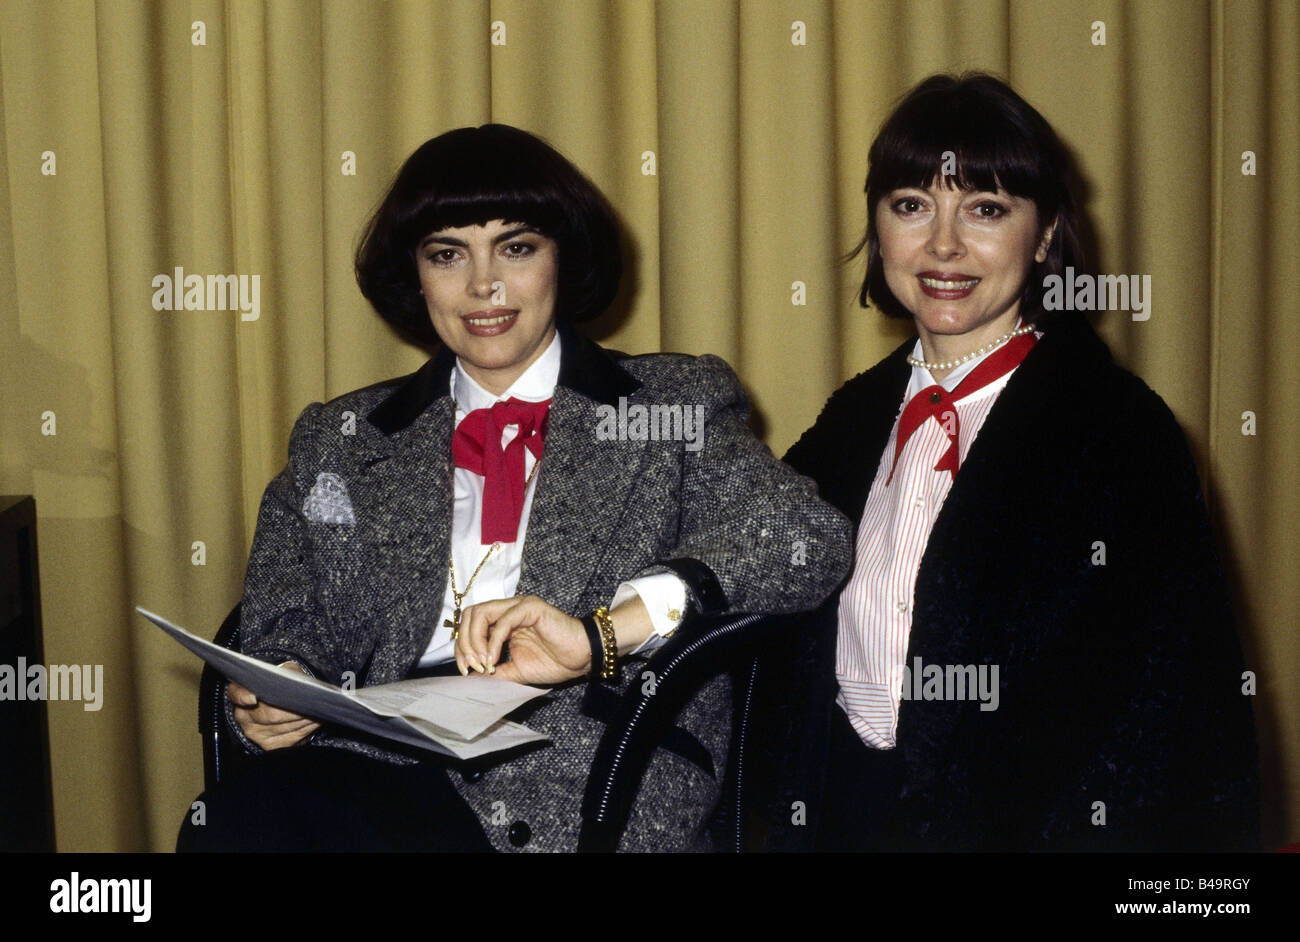 Mathieu, Mireille, * 22.7.1946, French musician / artist, (singer), half length, with her sister Monique, preparing for TV Show, 'Auf los gehtS s los', Germany 1977 - 1986, programme, 22.10.1983, Stock Photo